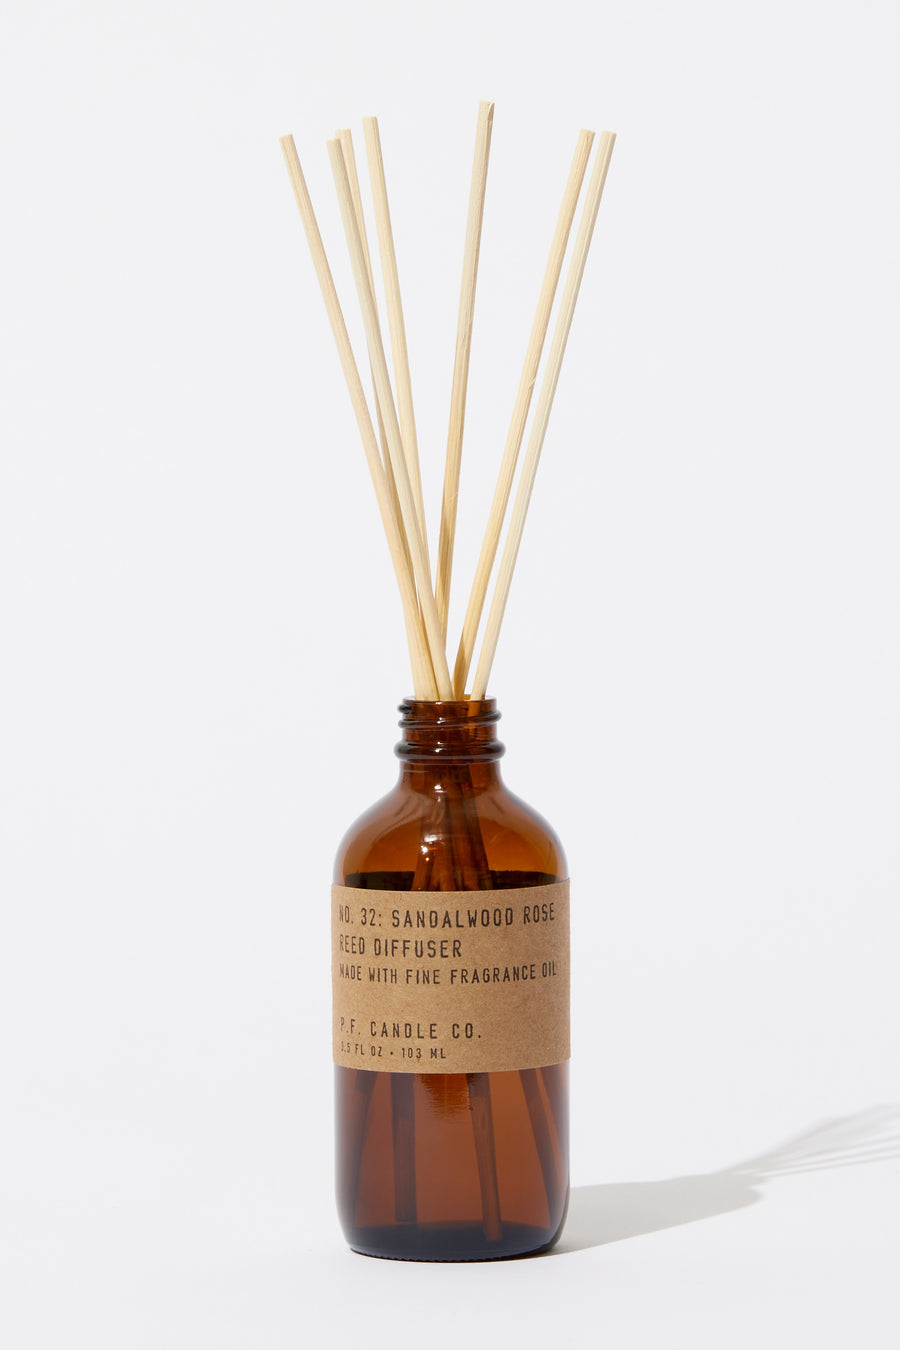 P.F. Candle Co. Reed Diffuser - Sandalwood Rose